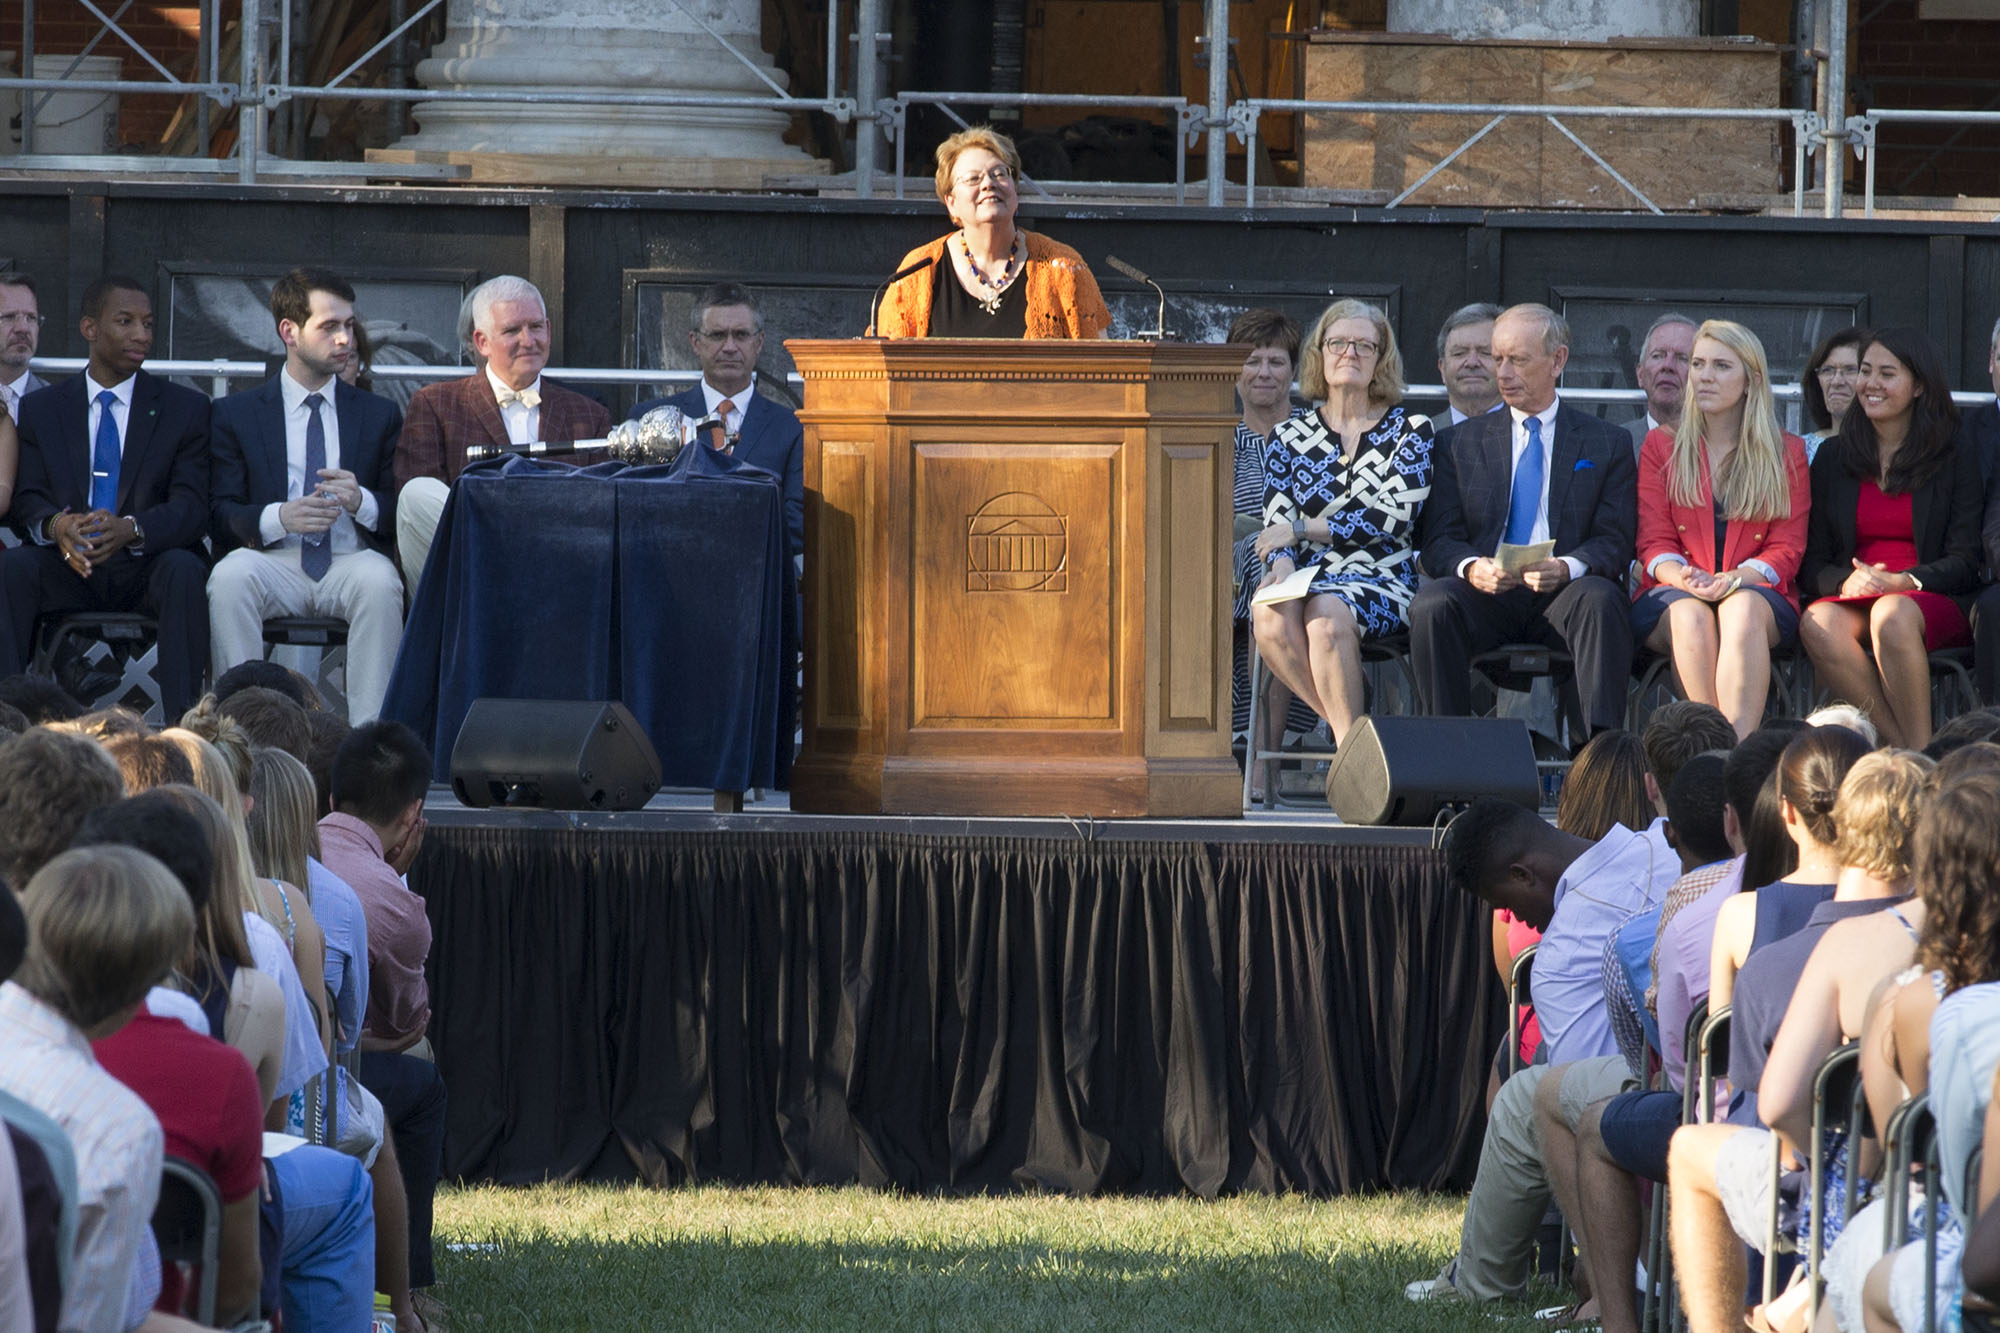 President Teresa Sullivan speaking from a podium to a group of students sitting in chairs on the lawn